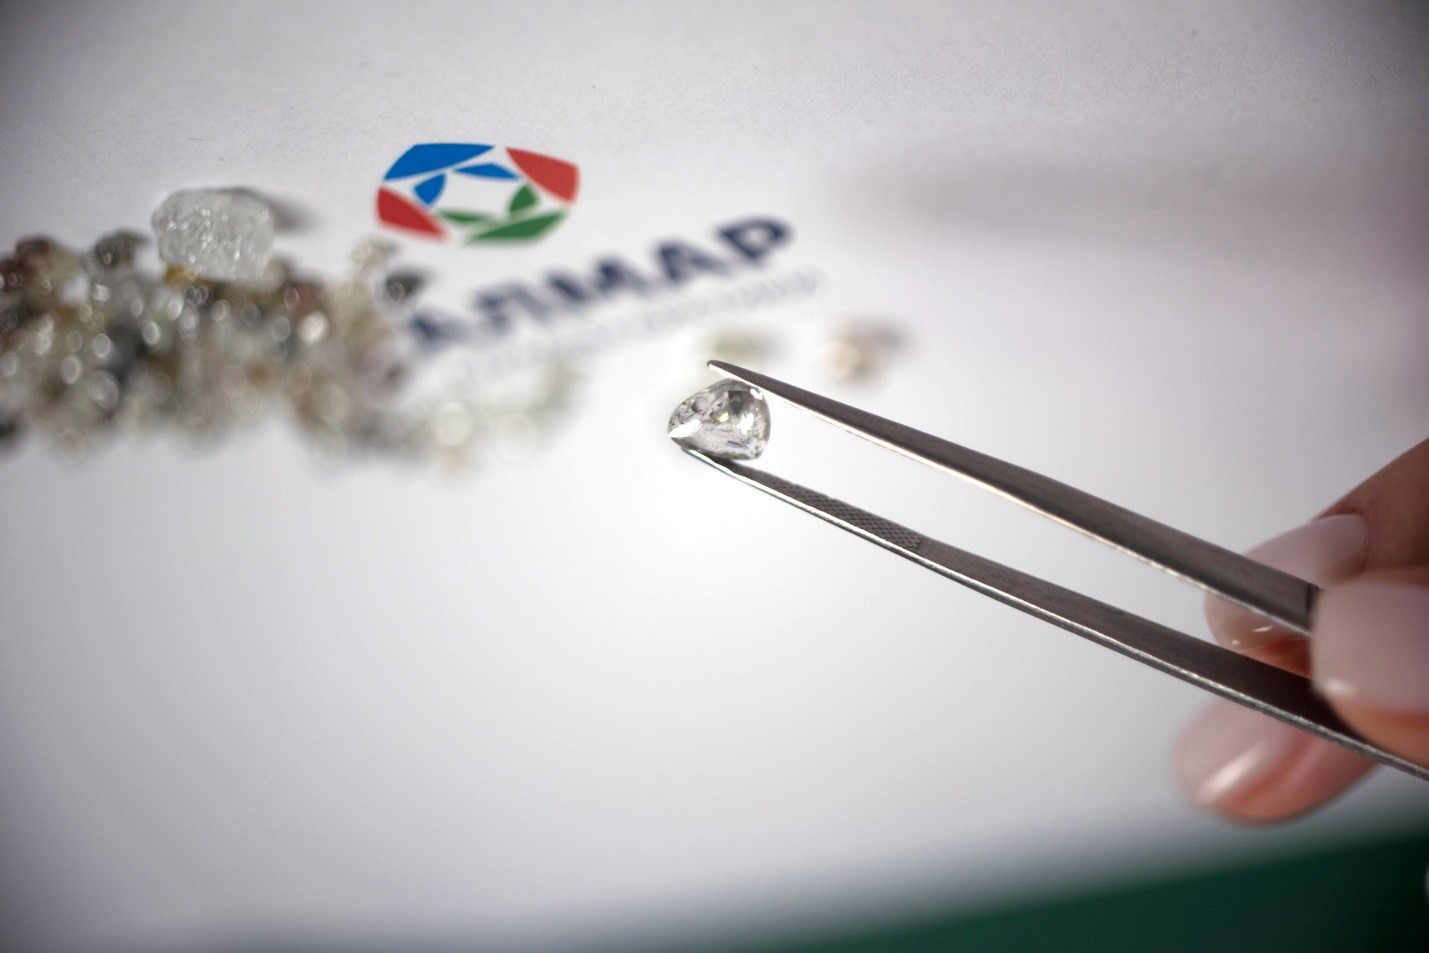 ALMAR significantly increased the level of knowledge of its mineral base and presented samples of extracted diamonds